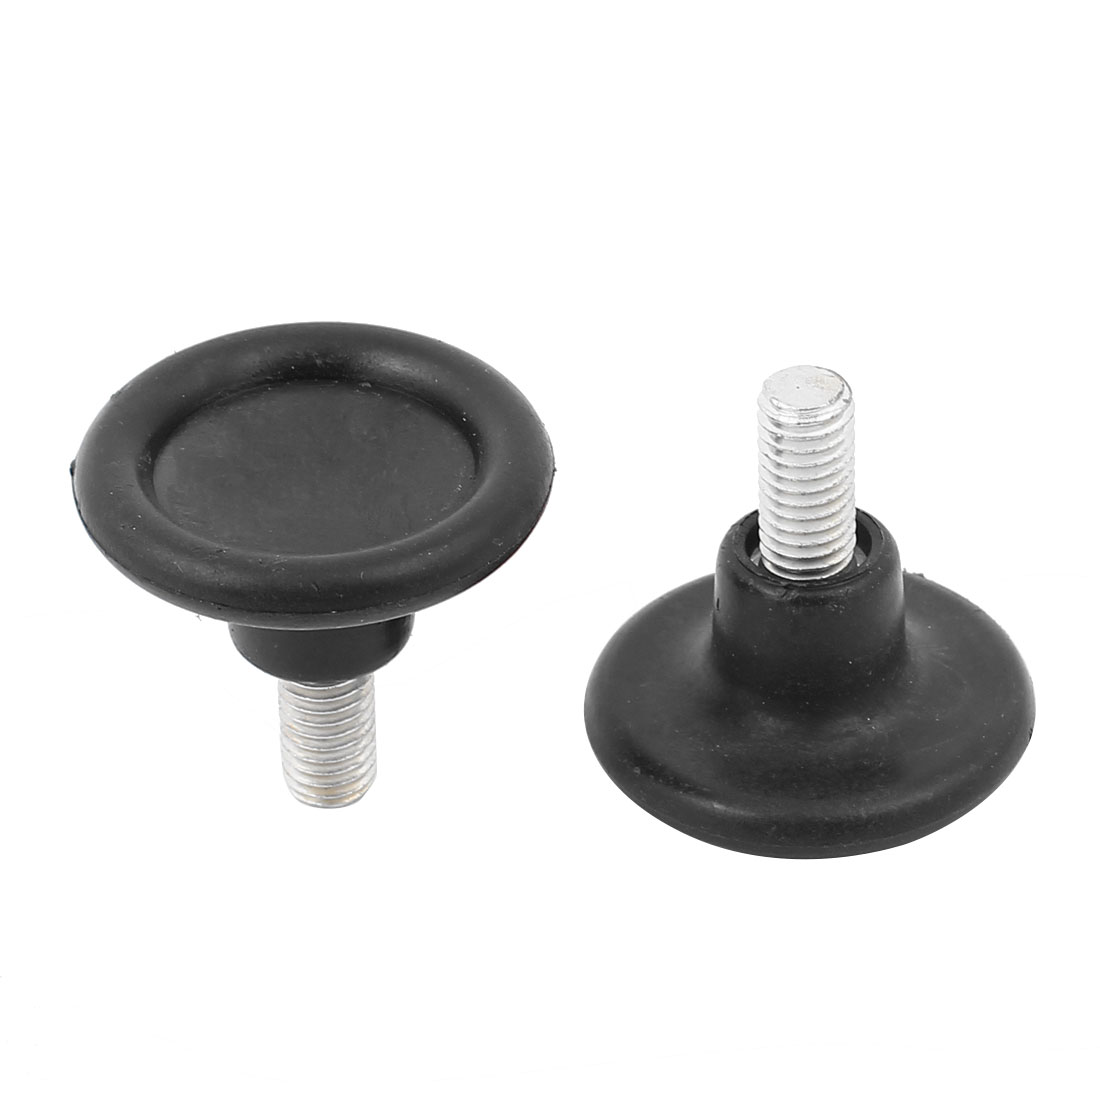 Unique Bargains Furniture Table Adjustable Screw On Leveling Glide Feet Legs Protector 5pcs